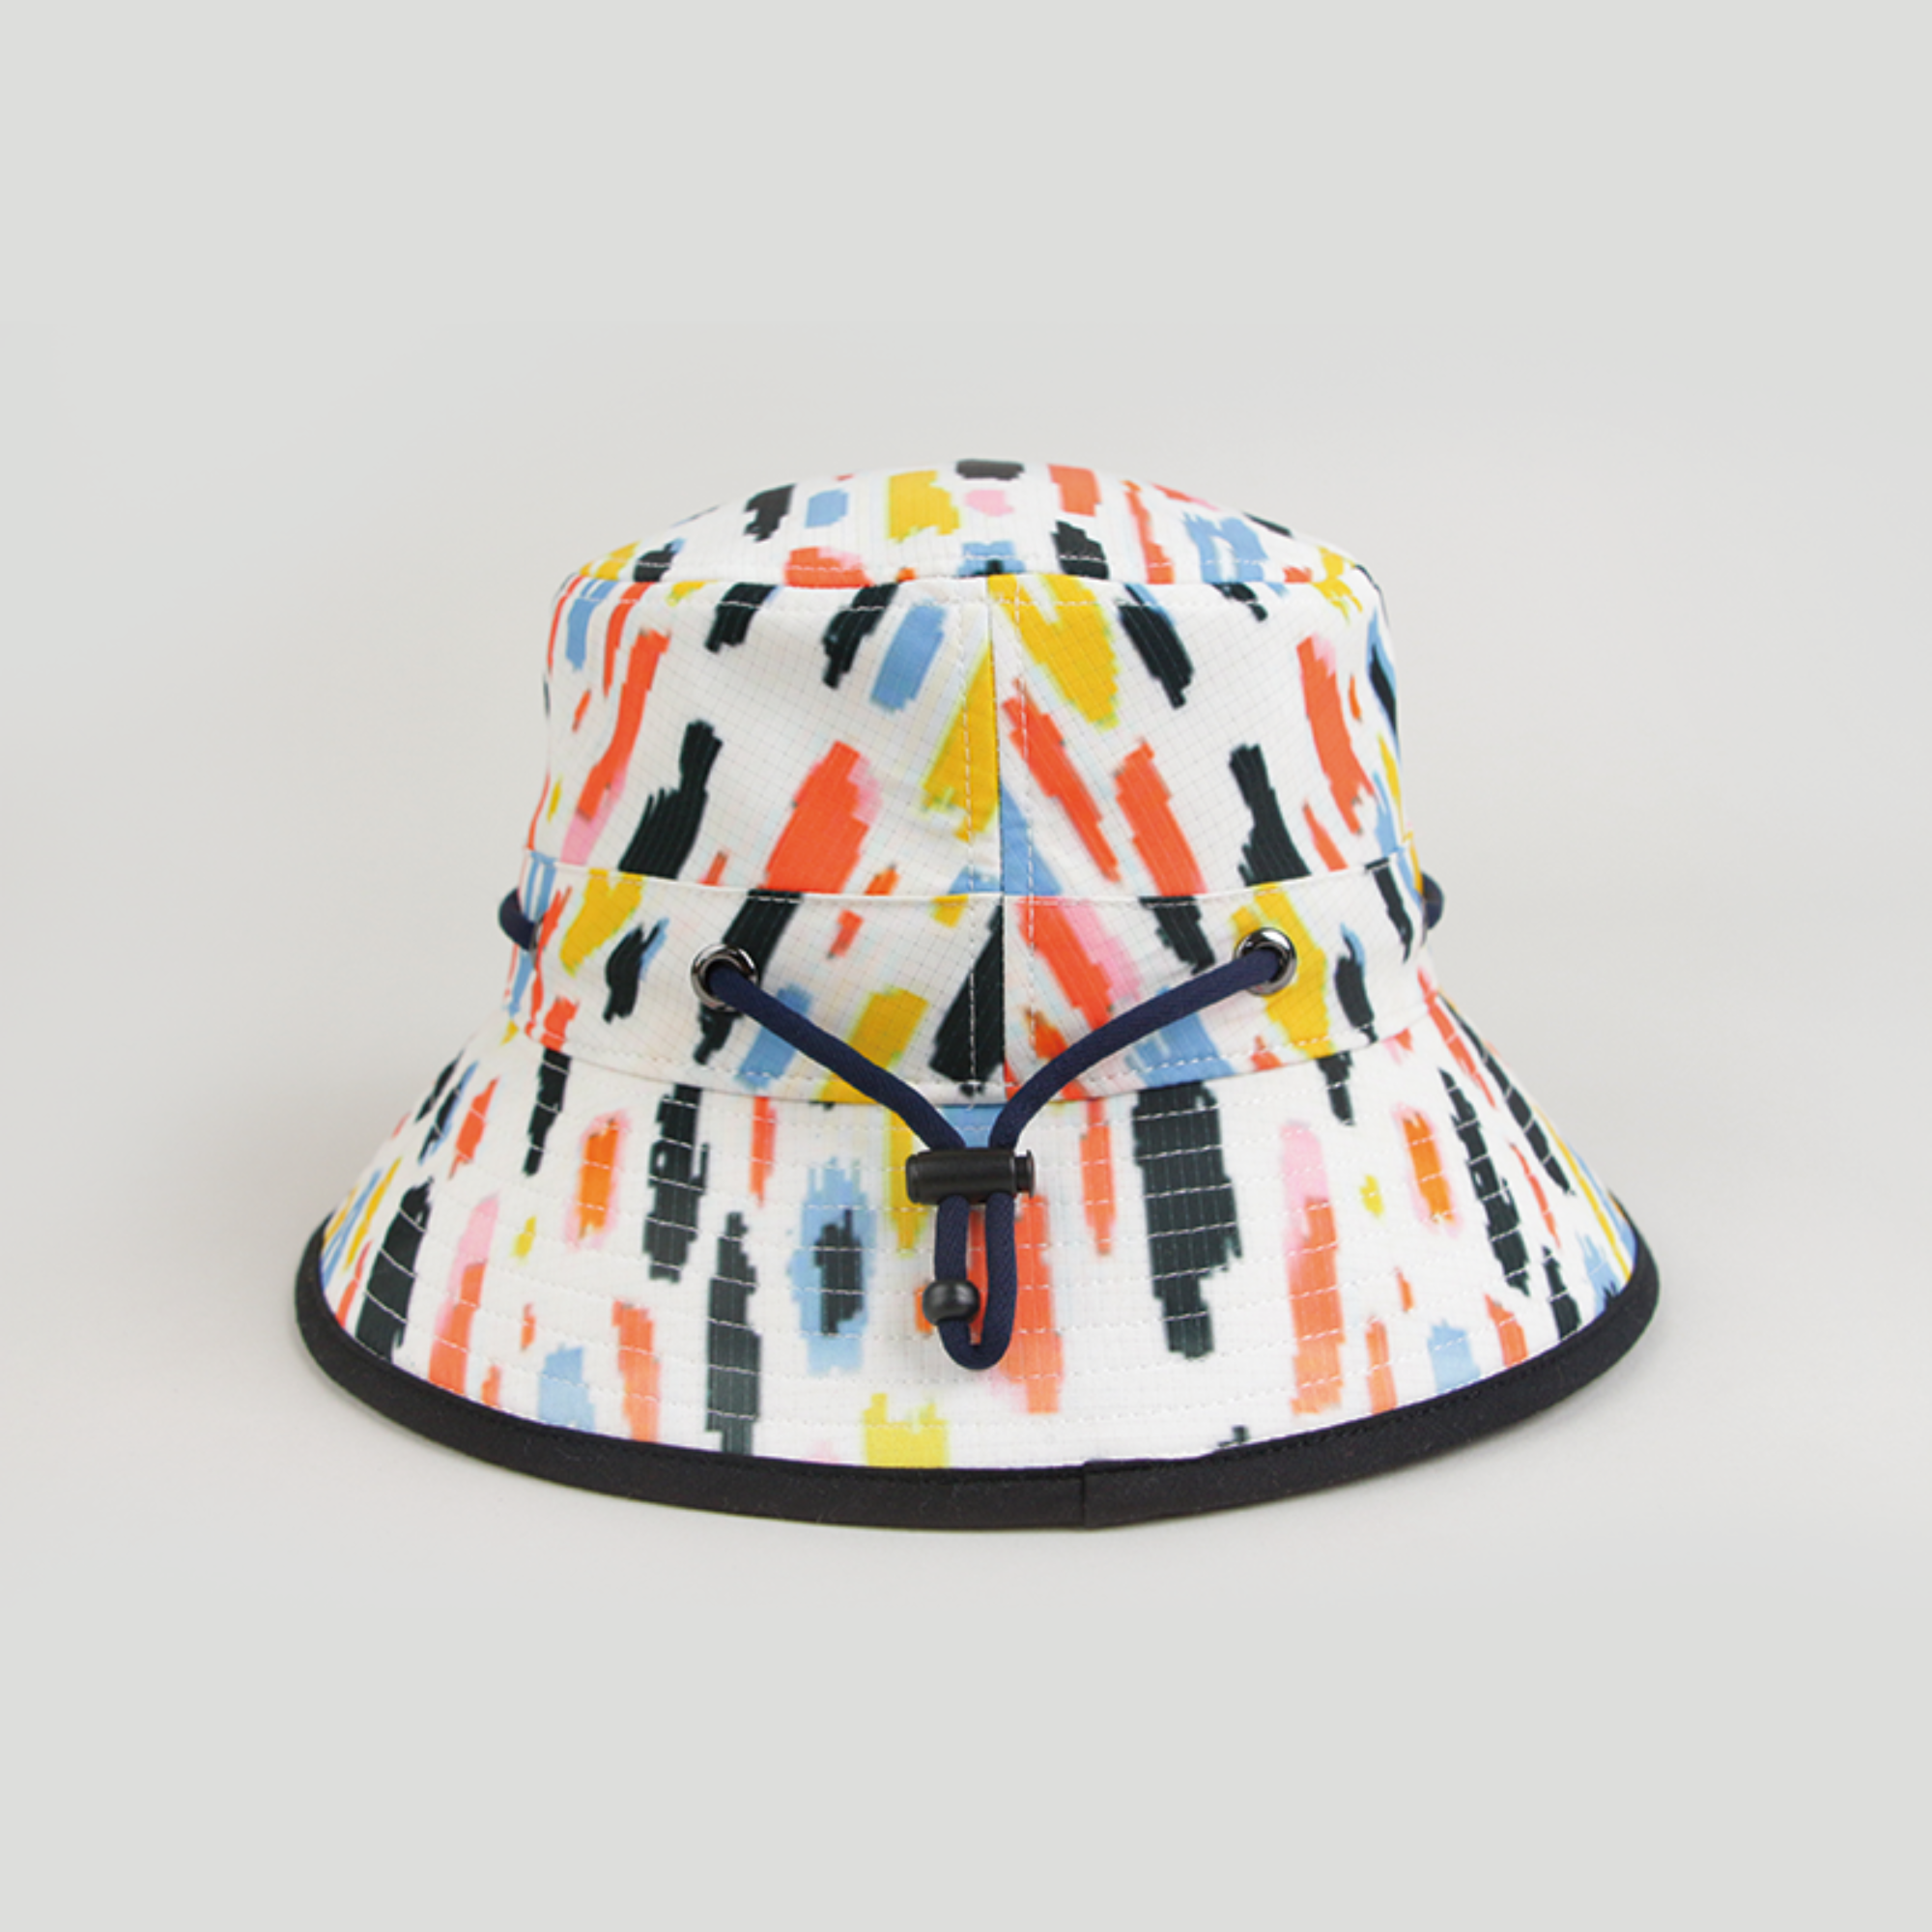 Colored bucket hat